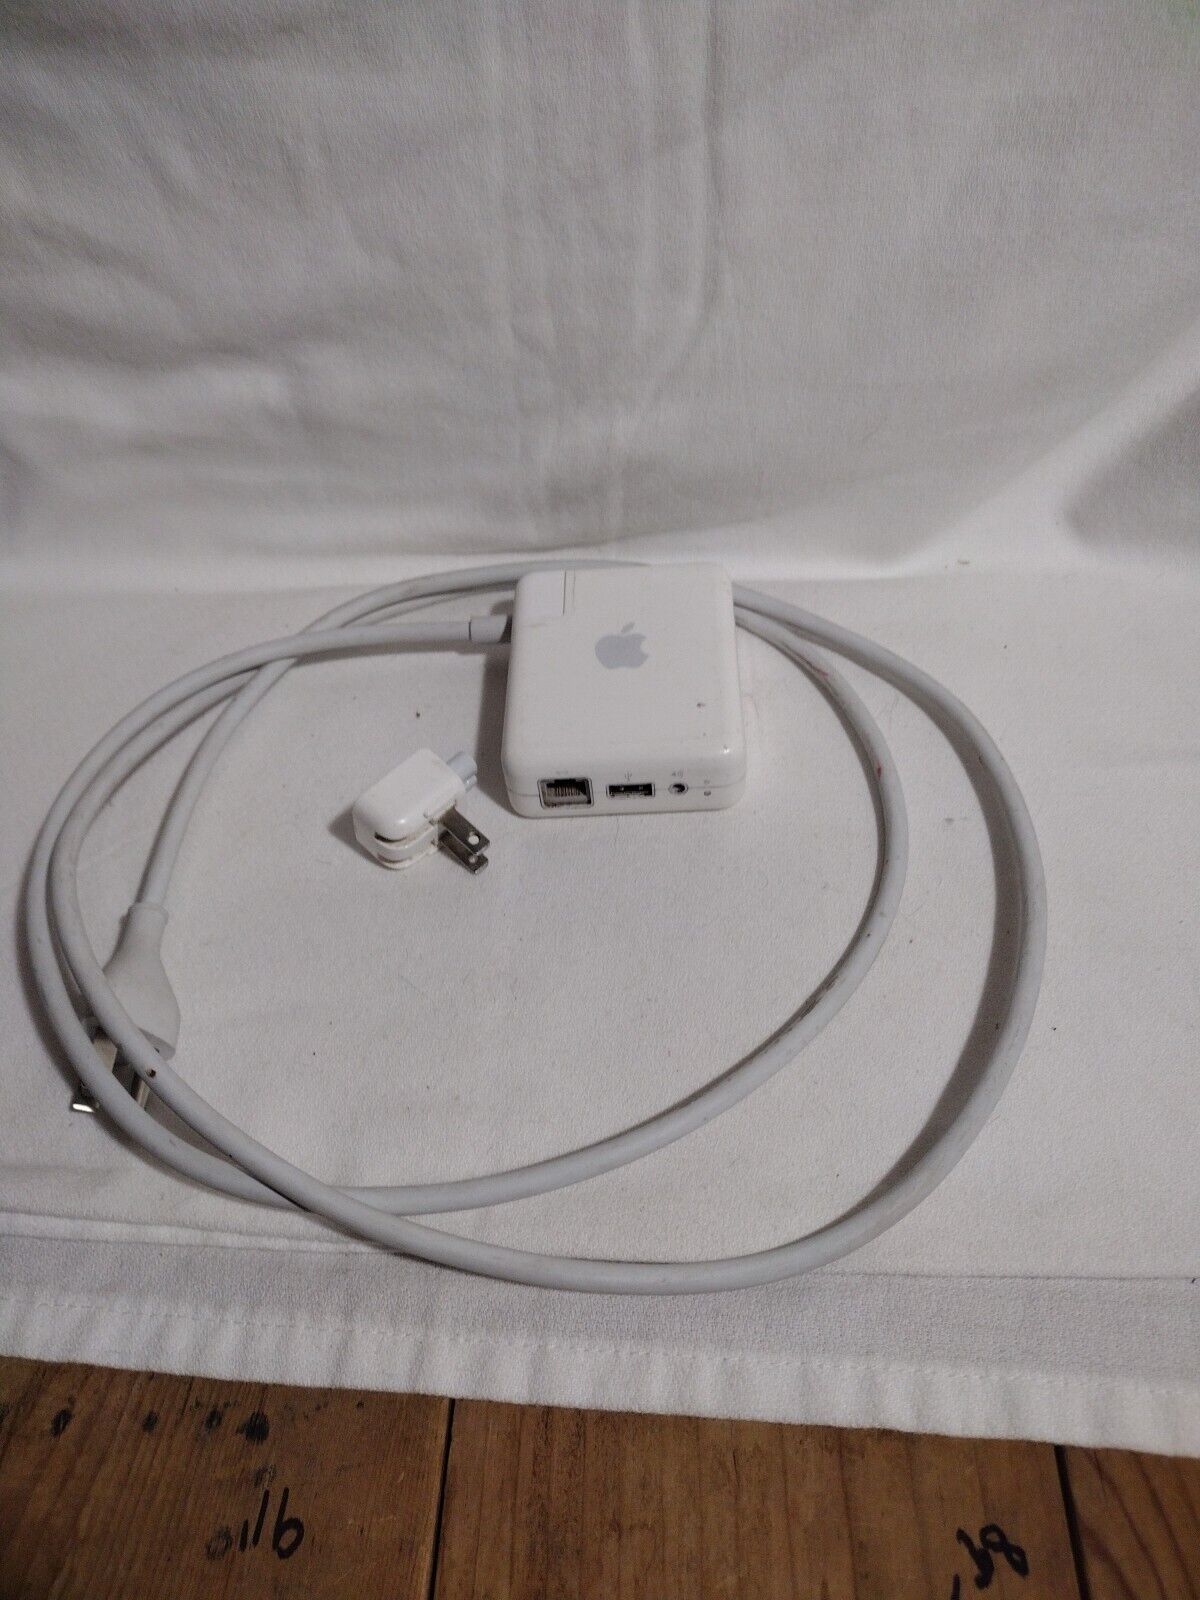 Apple Airport Express Wireless Base Station Model A1264 (BS)